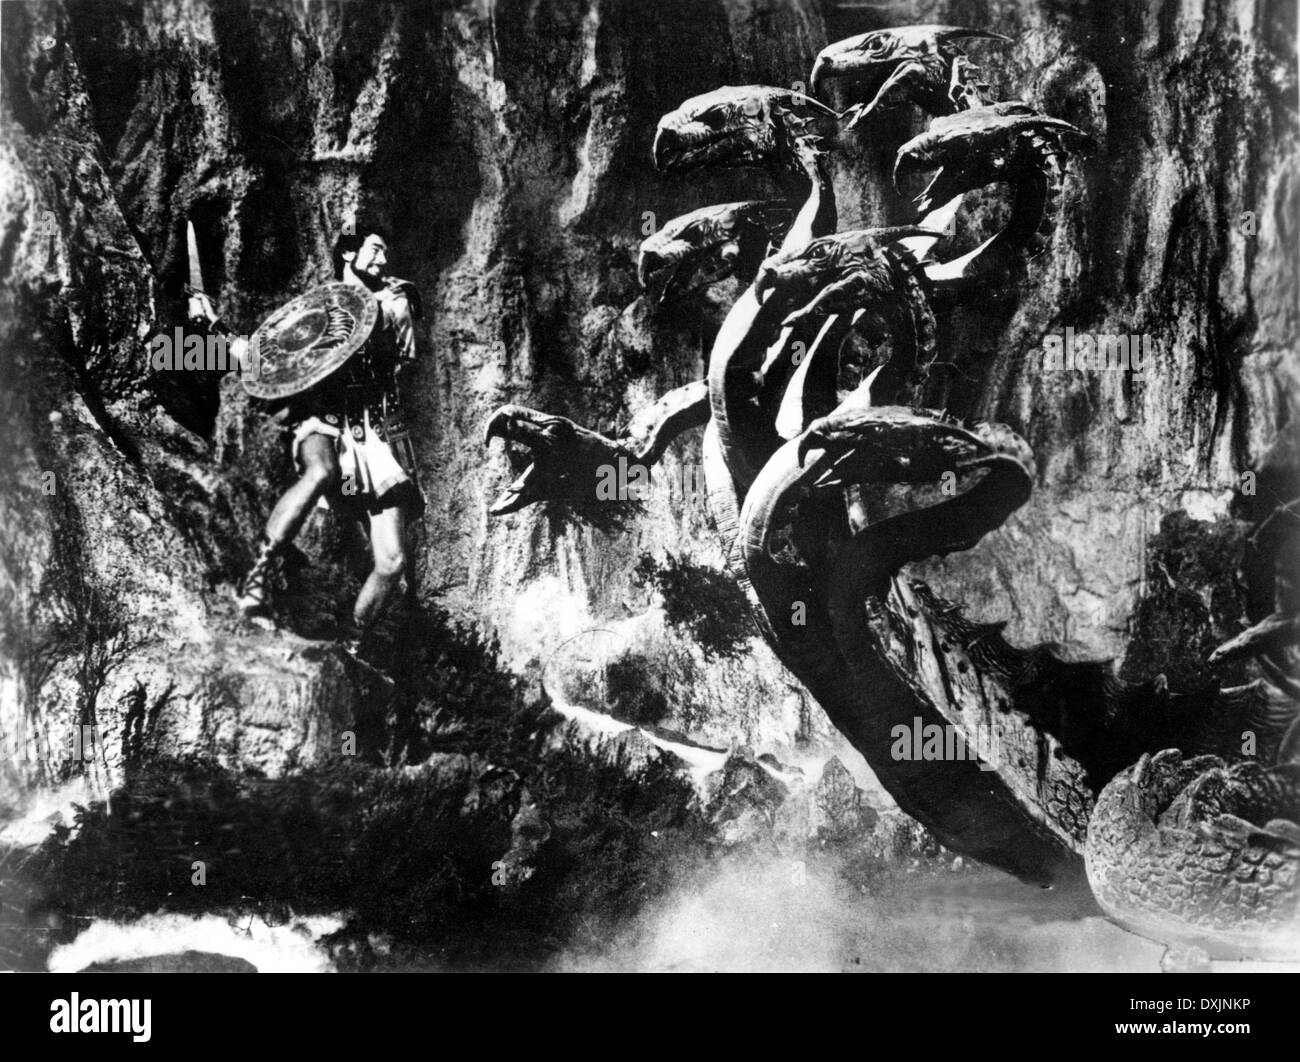 Columbia pictures Black and White Stock Photos & Images - Alamy